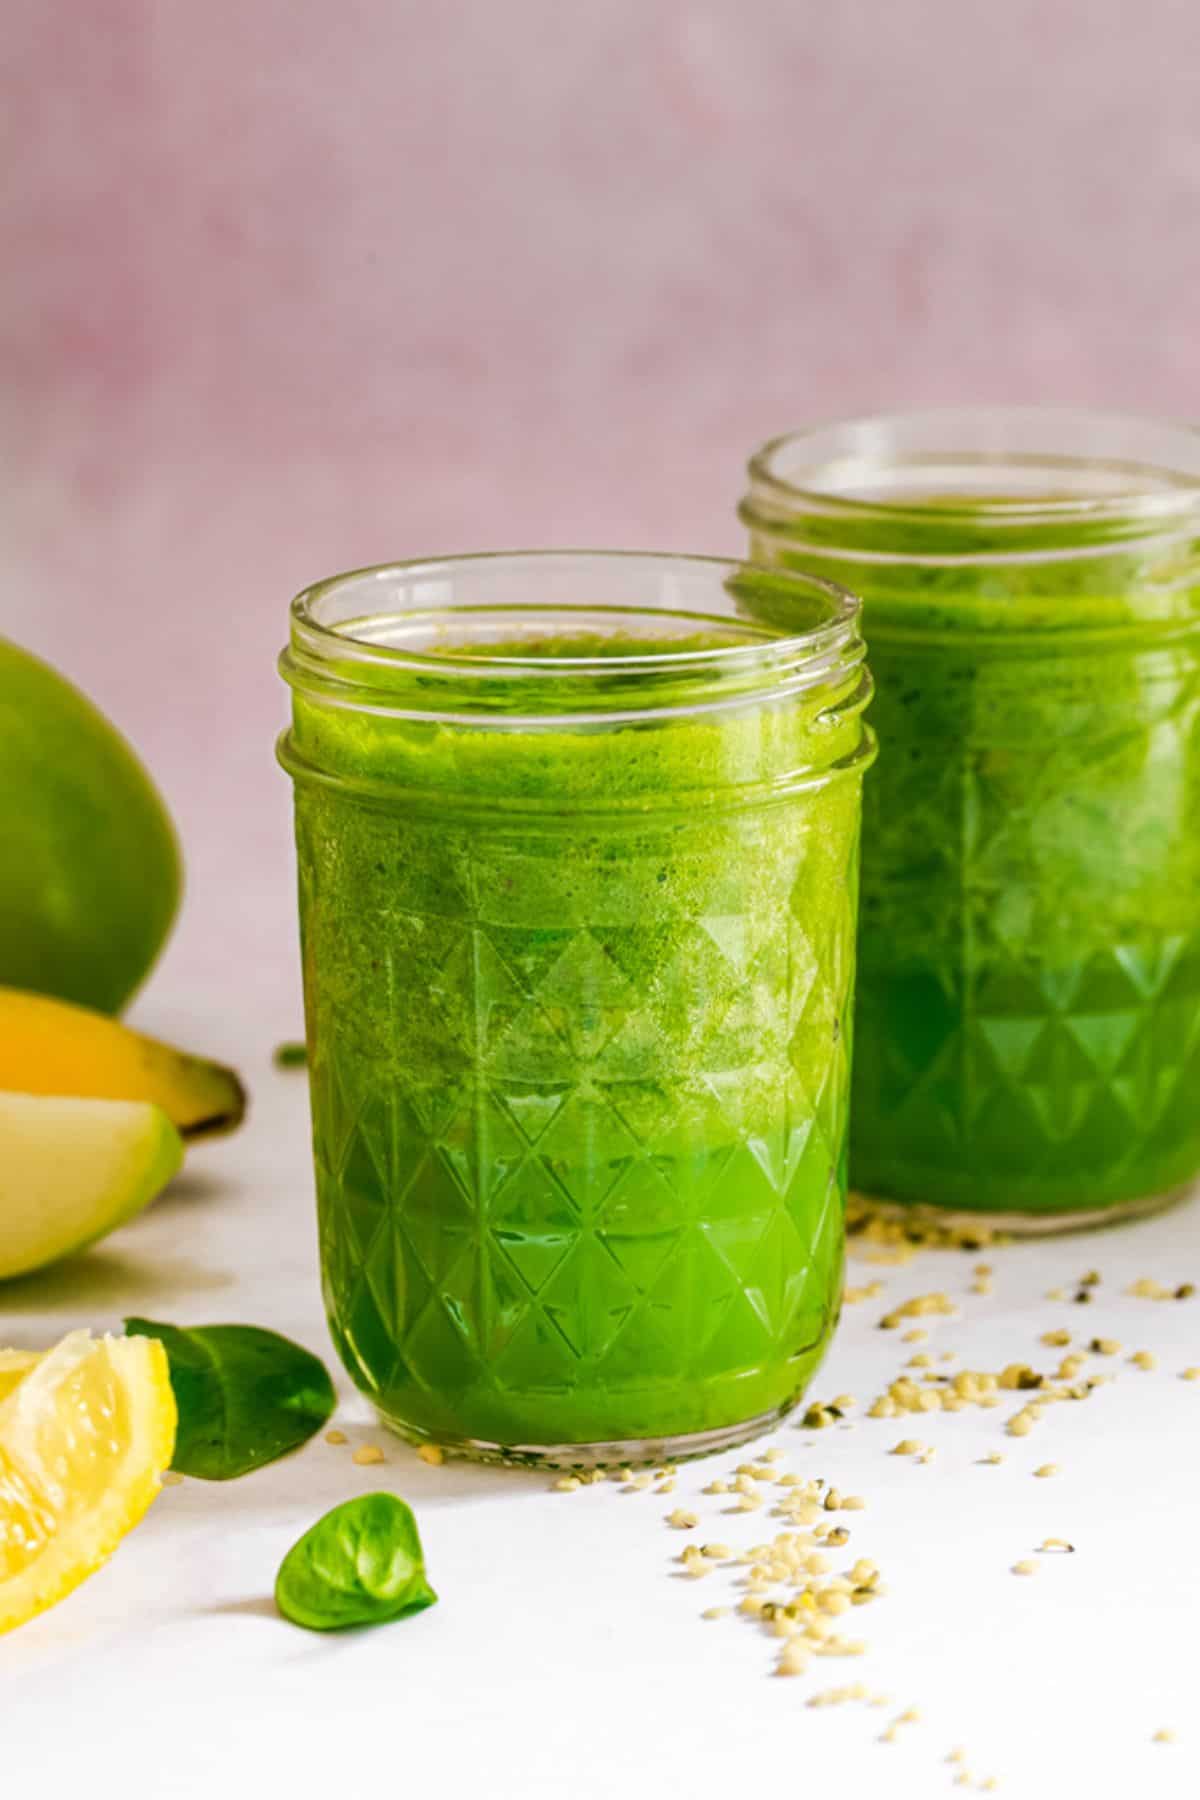 Two glasses of bright green smoothie with recipe ingredients nearby: sliced apple, banana, spinach, lemon slices & hemp seeds.